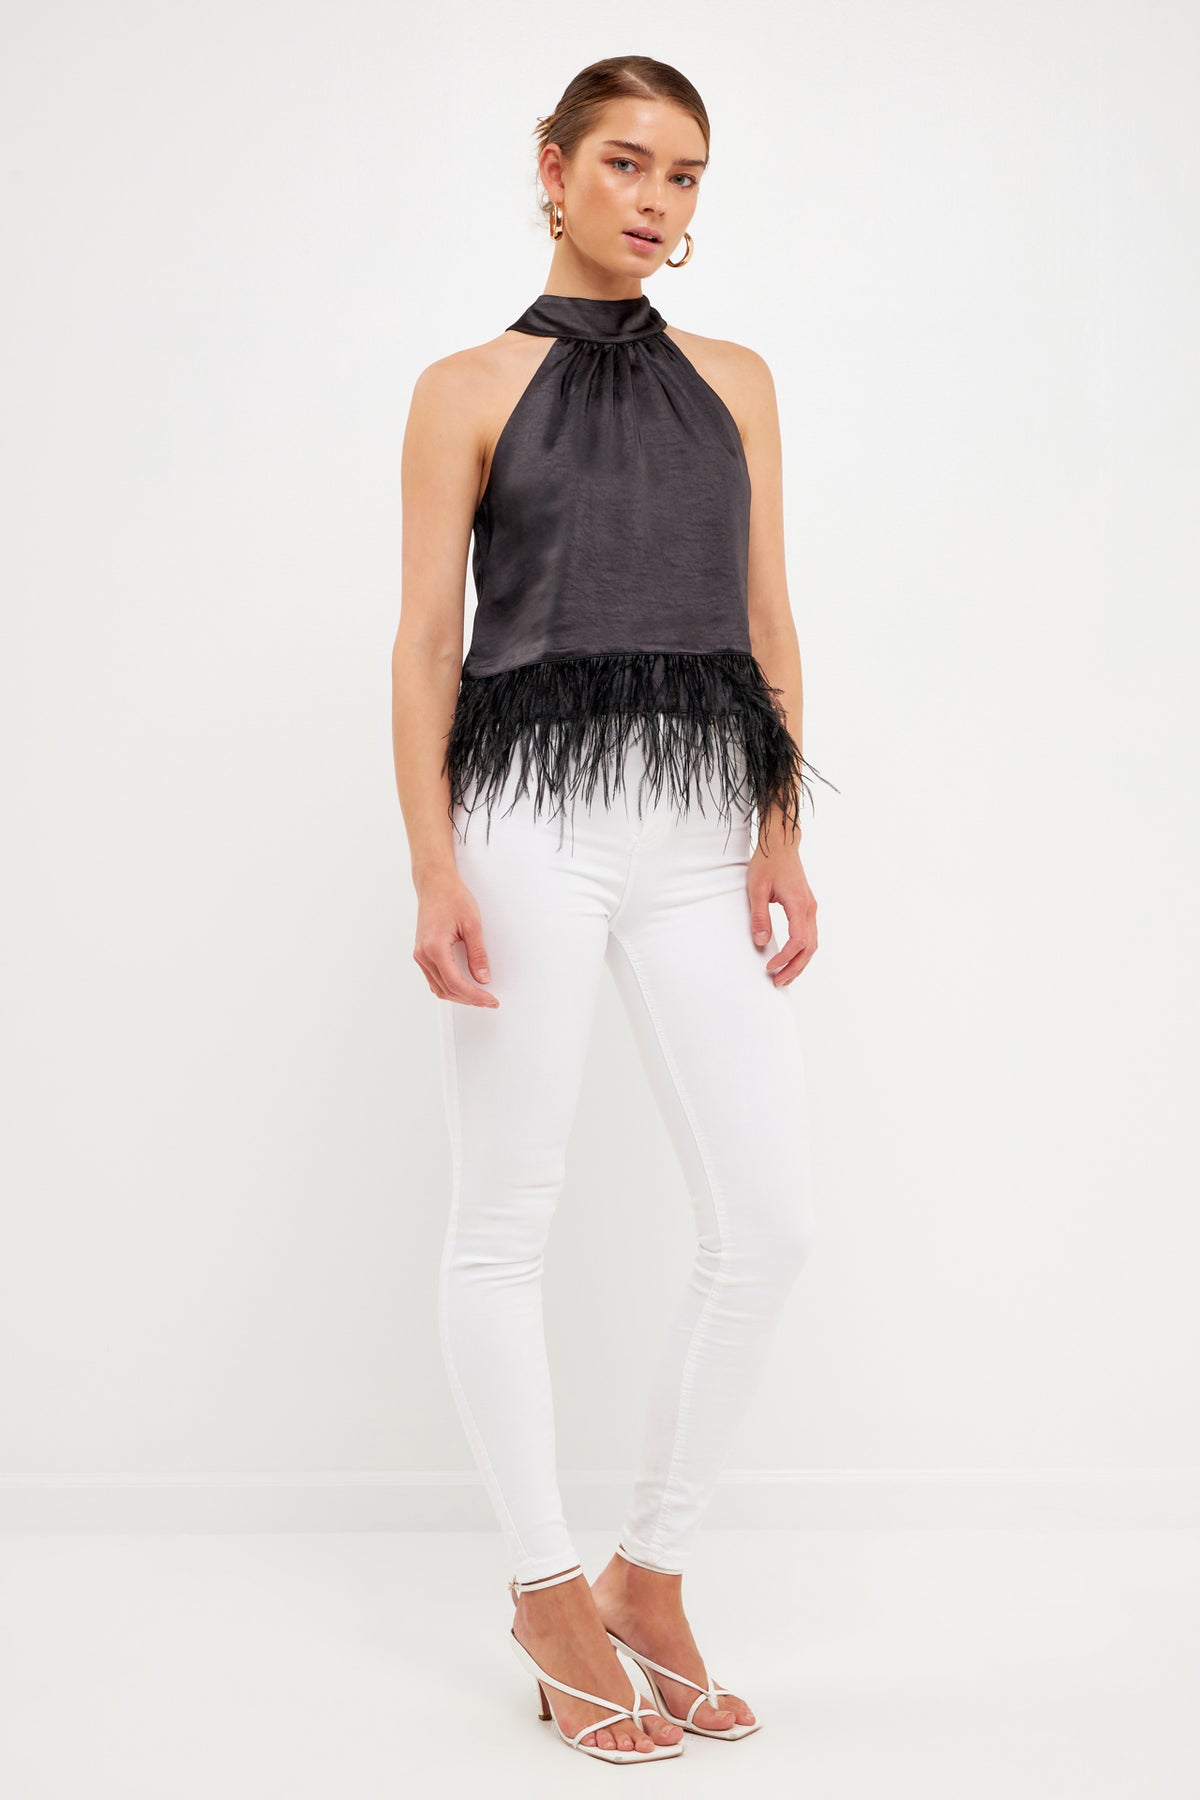 ENDLESS ROSE - Feather Trim Top - TOPS available at Objectrare